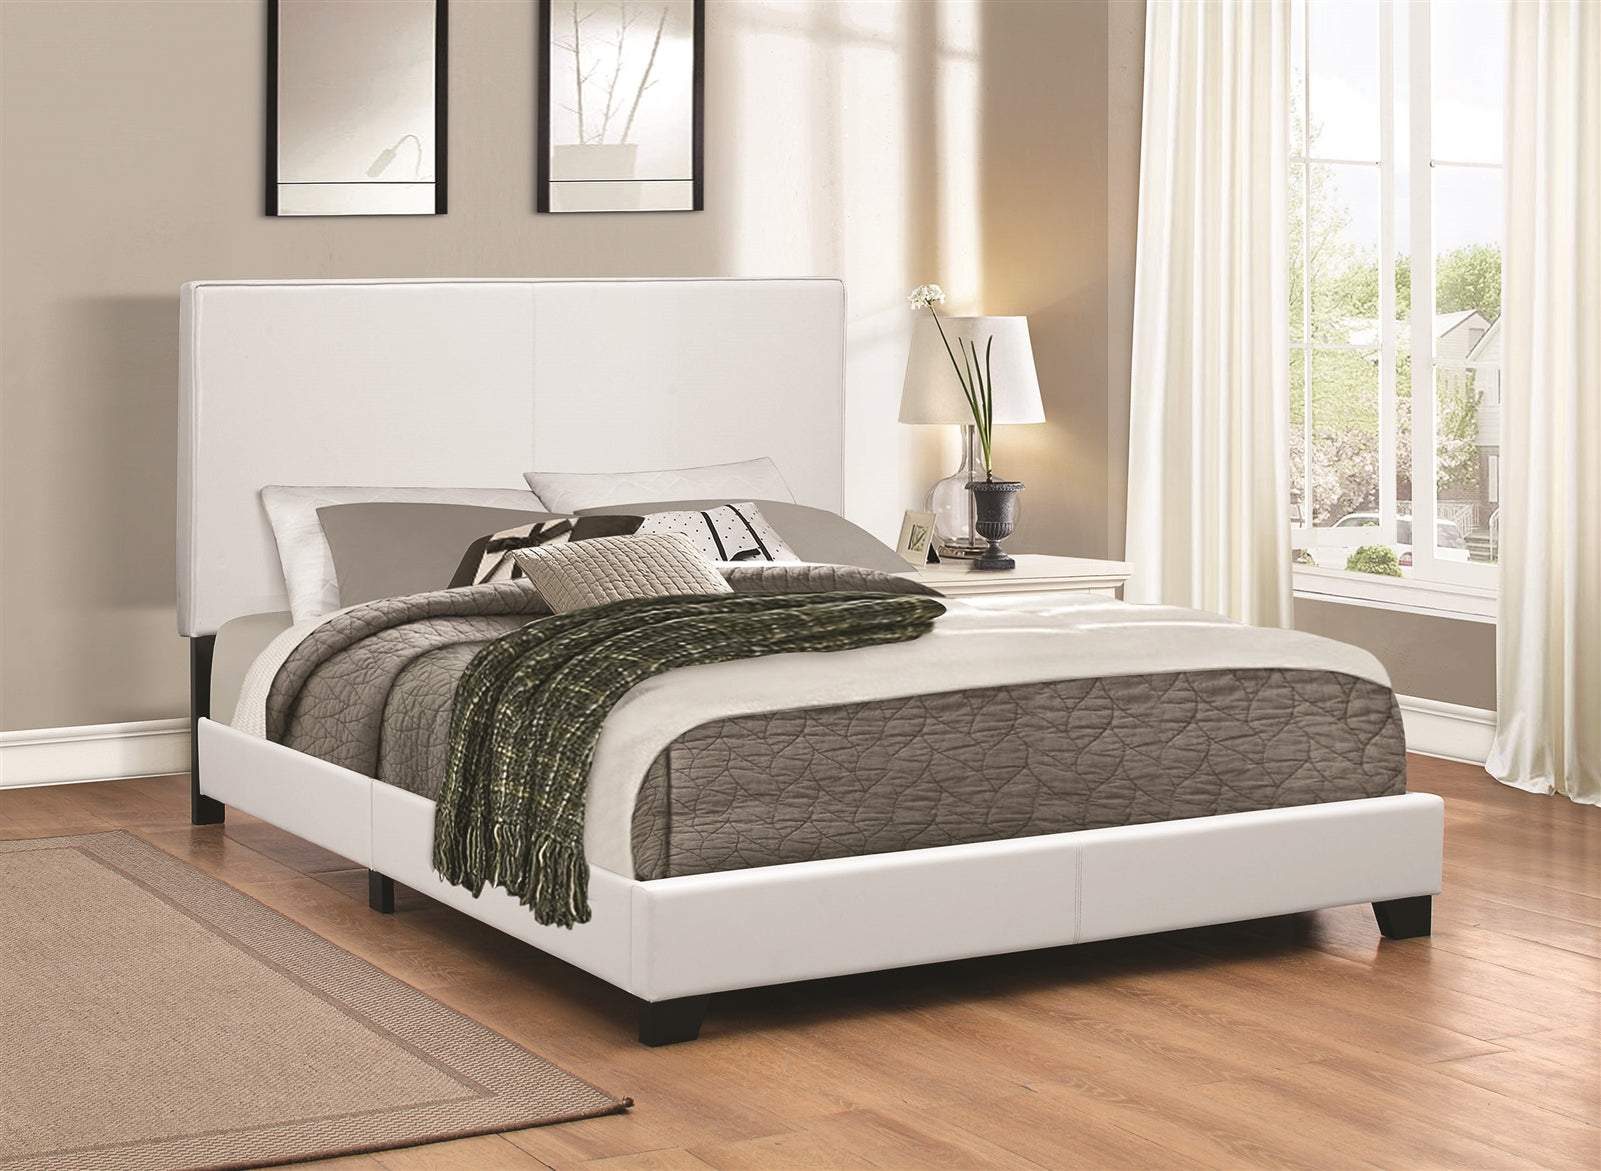 Muave Queen Size White Leatherette Platform Bed